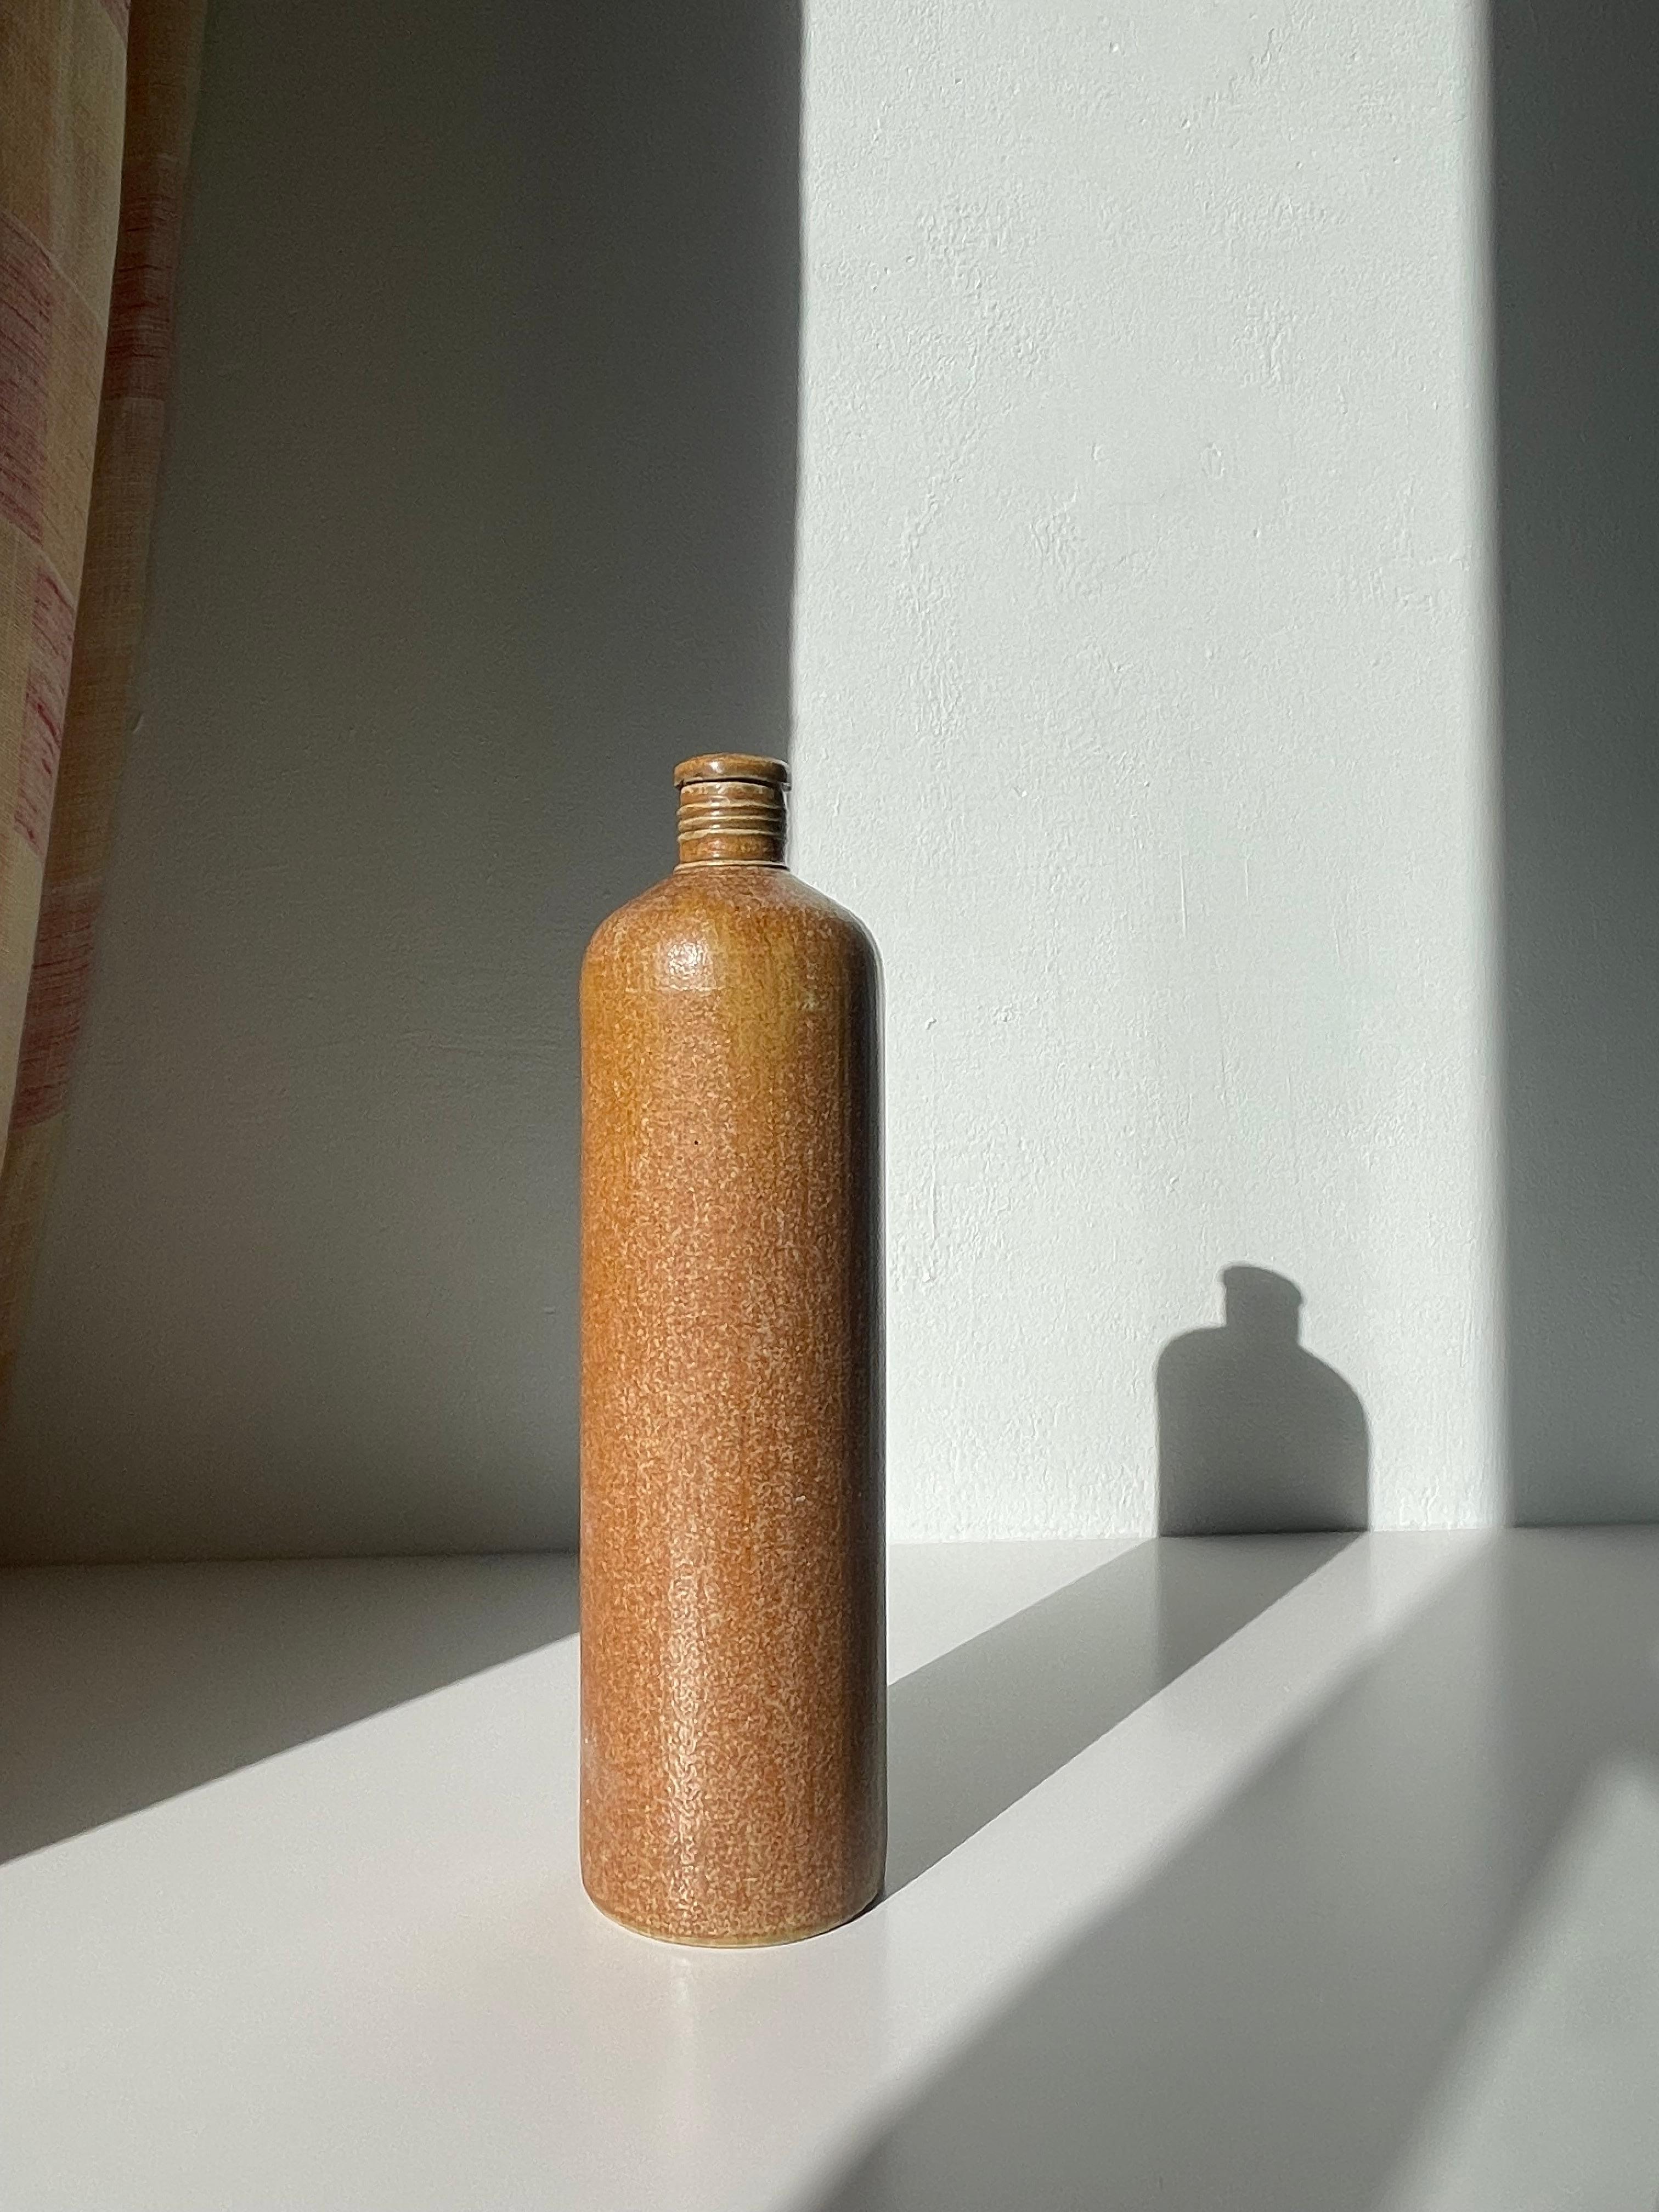 Antique stoneware water bottle manufactured by German MKM in the 1930s. Tall cylinder shape with narrow neck - perfect decorative item or vase for a few branches. Warm caramel colored salt glaze. Beautiful vintage condition.
Germany, 1930s.